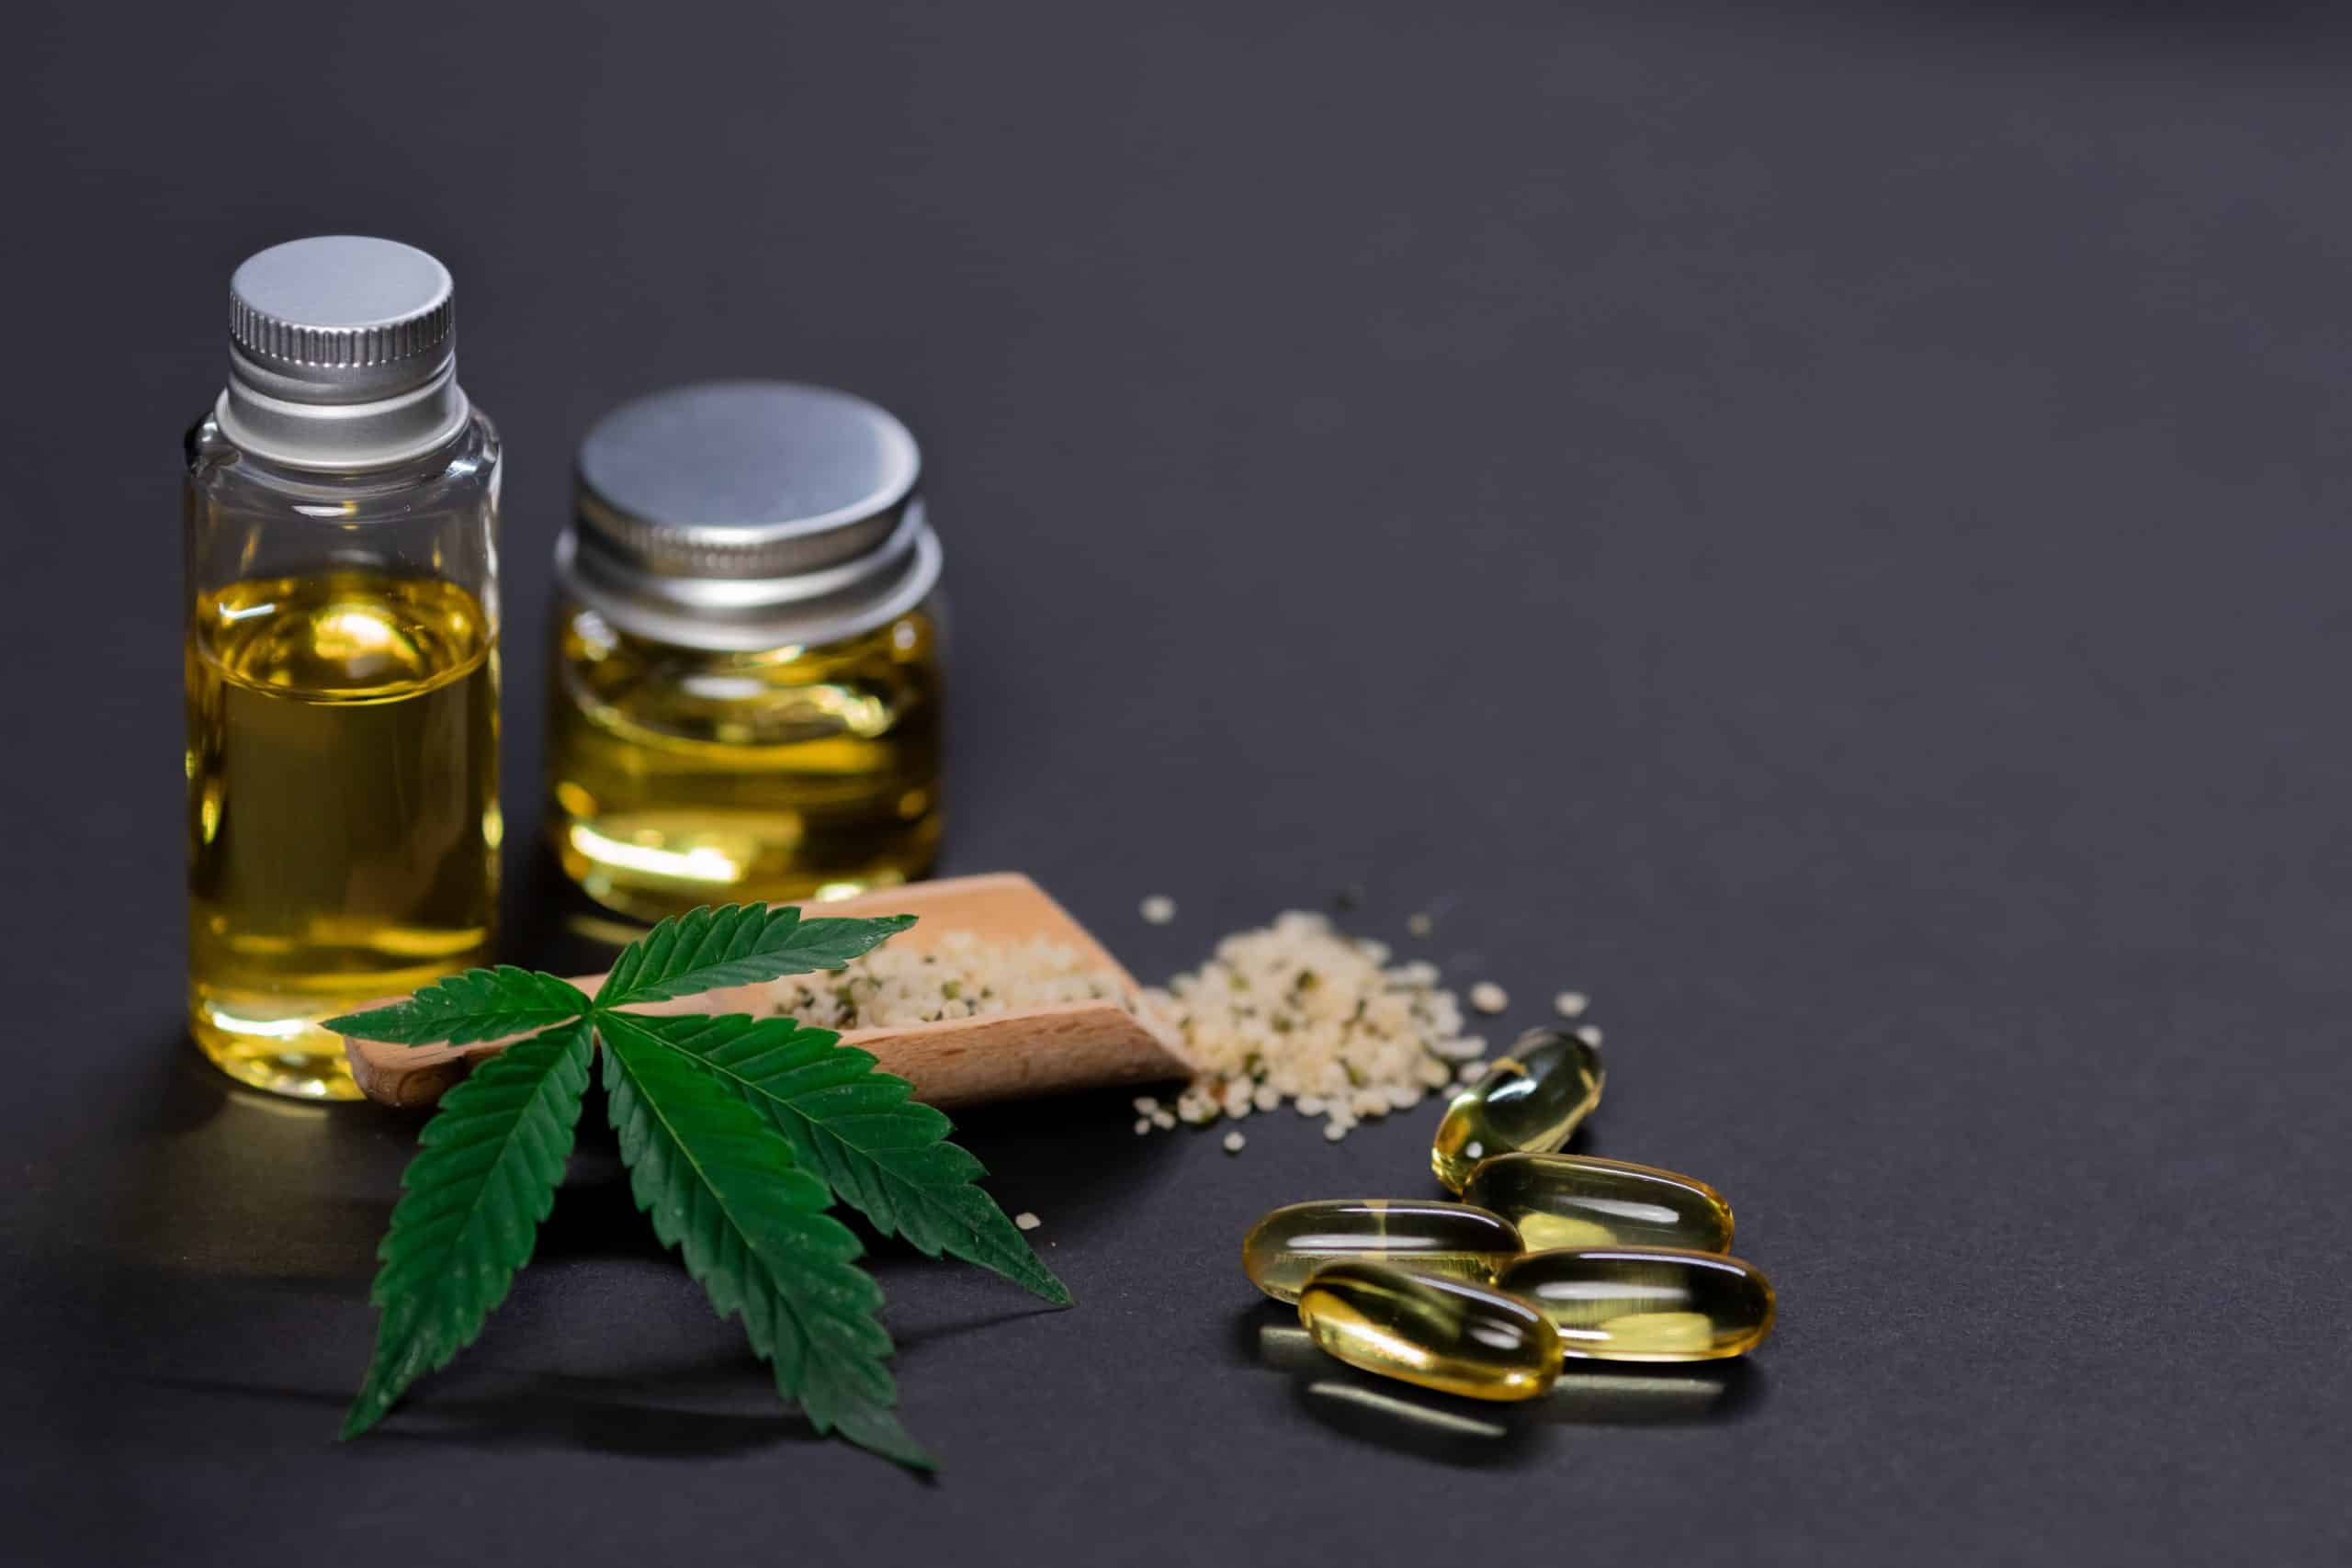 Five misconceptions and debates about cannabis with a high CBD content